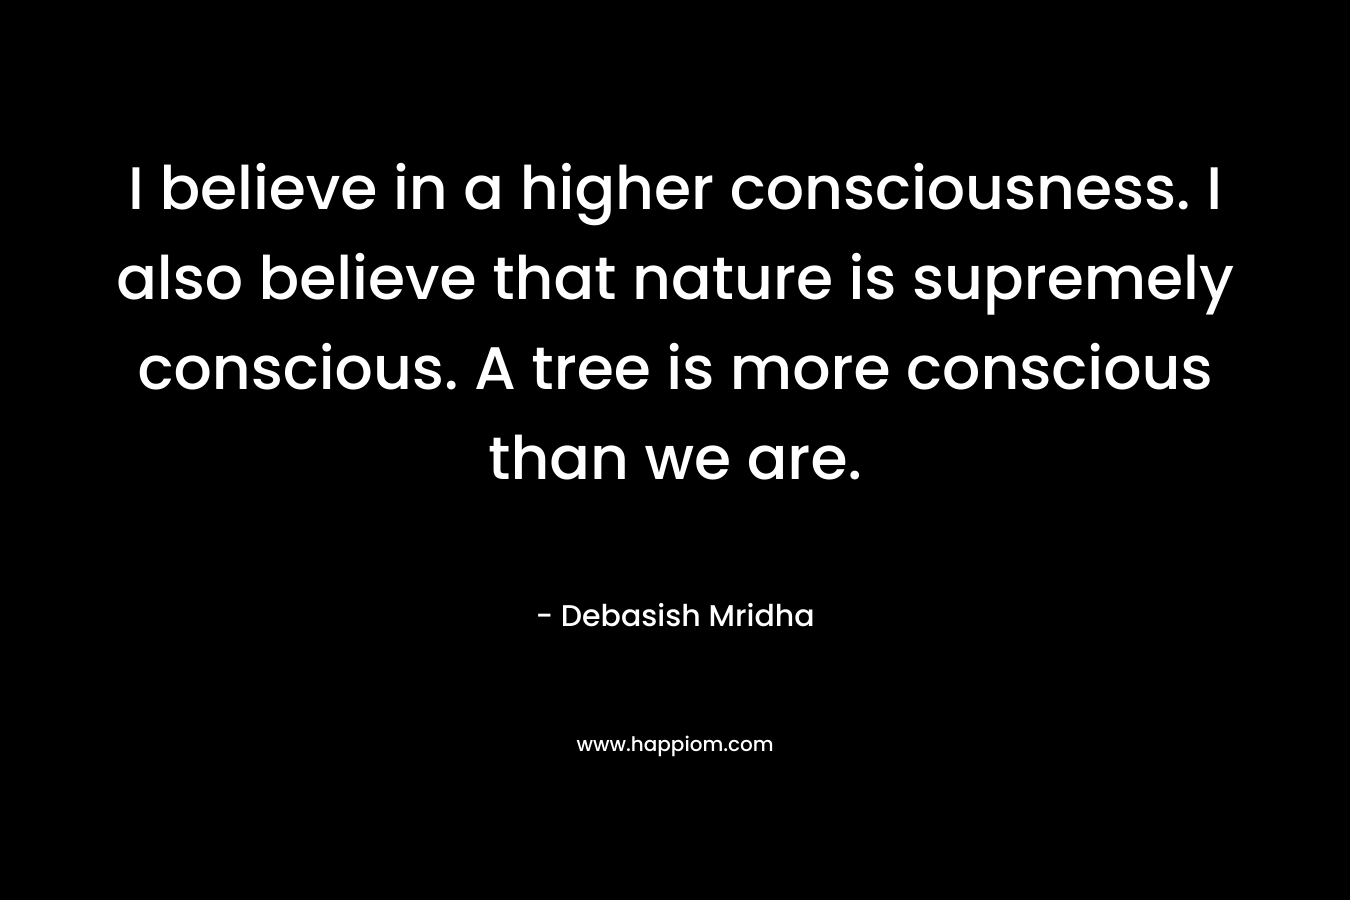 I believe in a higher consciousness. I also believe that nature is supremely conscious. A tree is more conscious than we are.